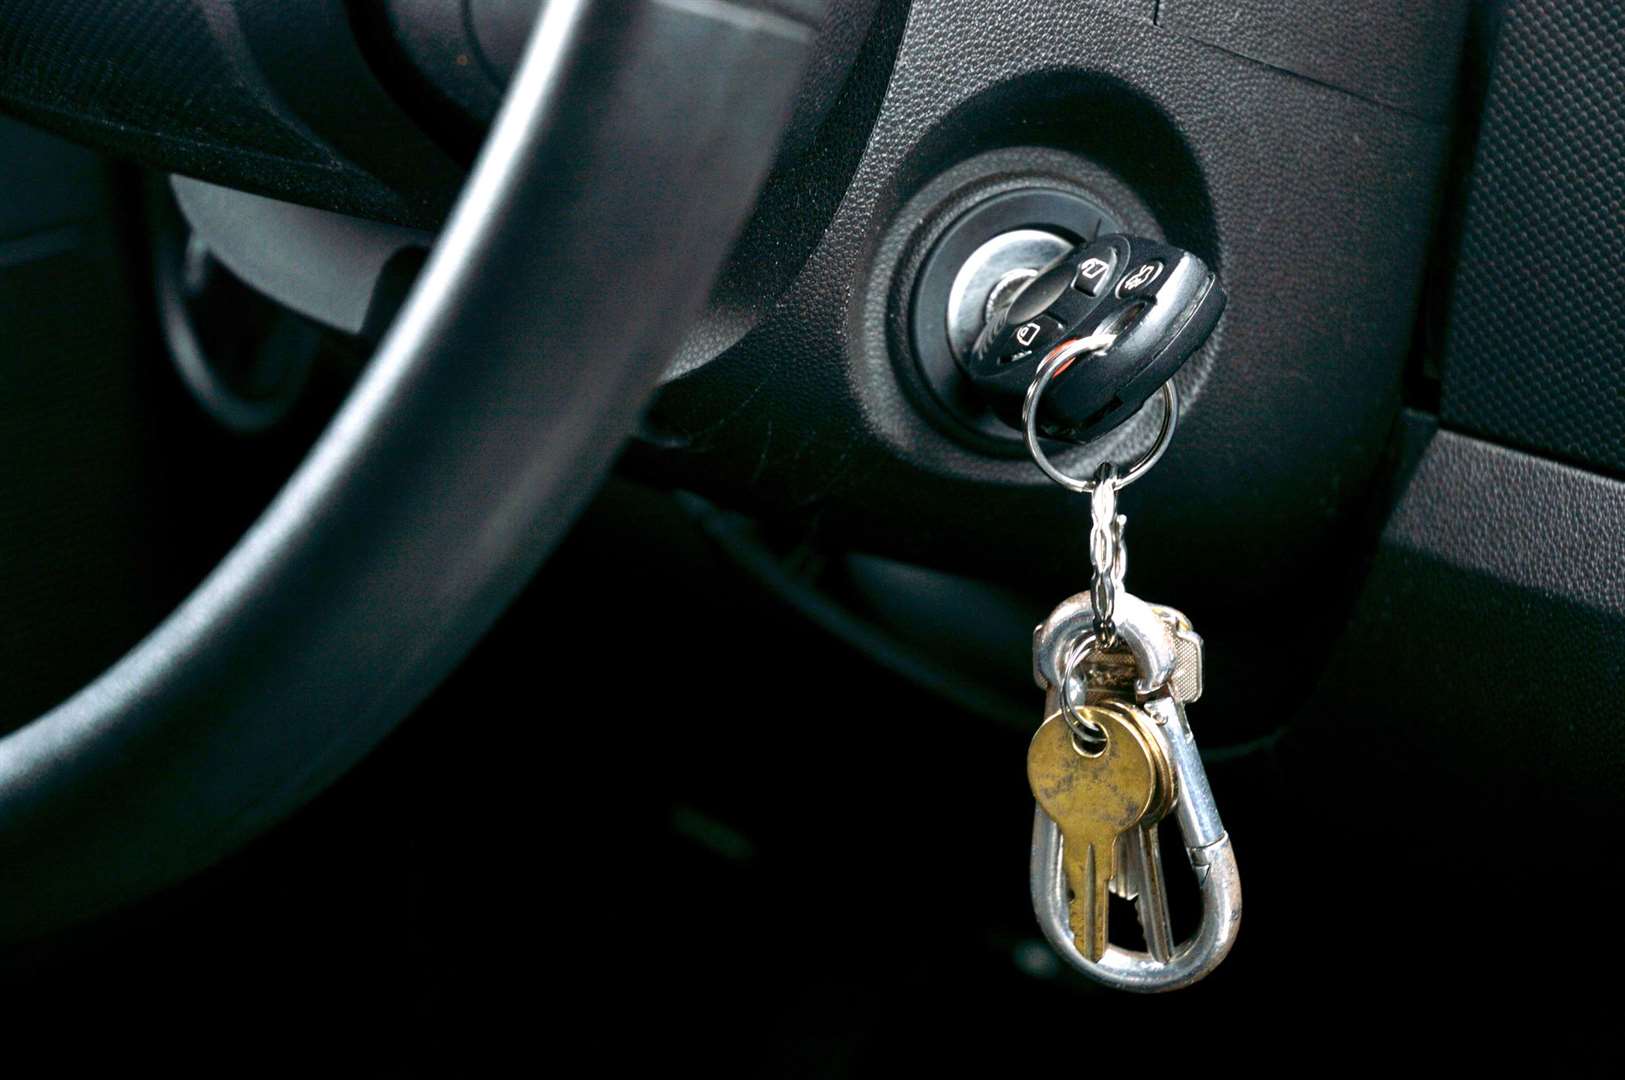 Of course, as well as mechanical checks you're likely going to want your car to look spick and span too. However, avoid leaving your keys in the ignition or using the radio as doing so can quite quickly drain the battery and leave you with a starting headache.